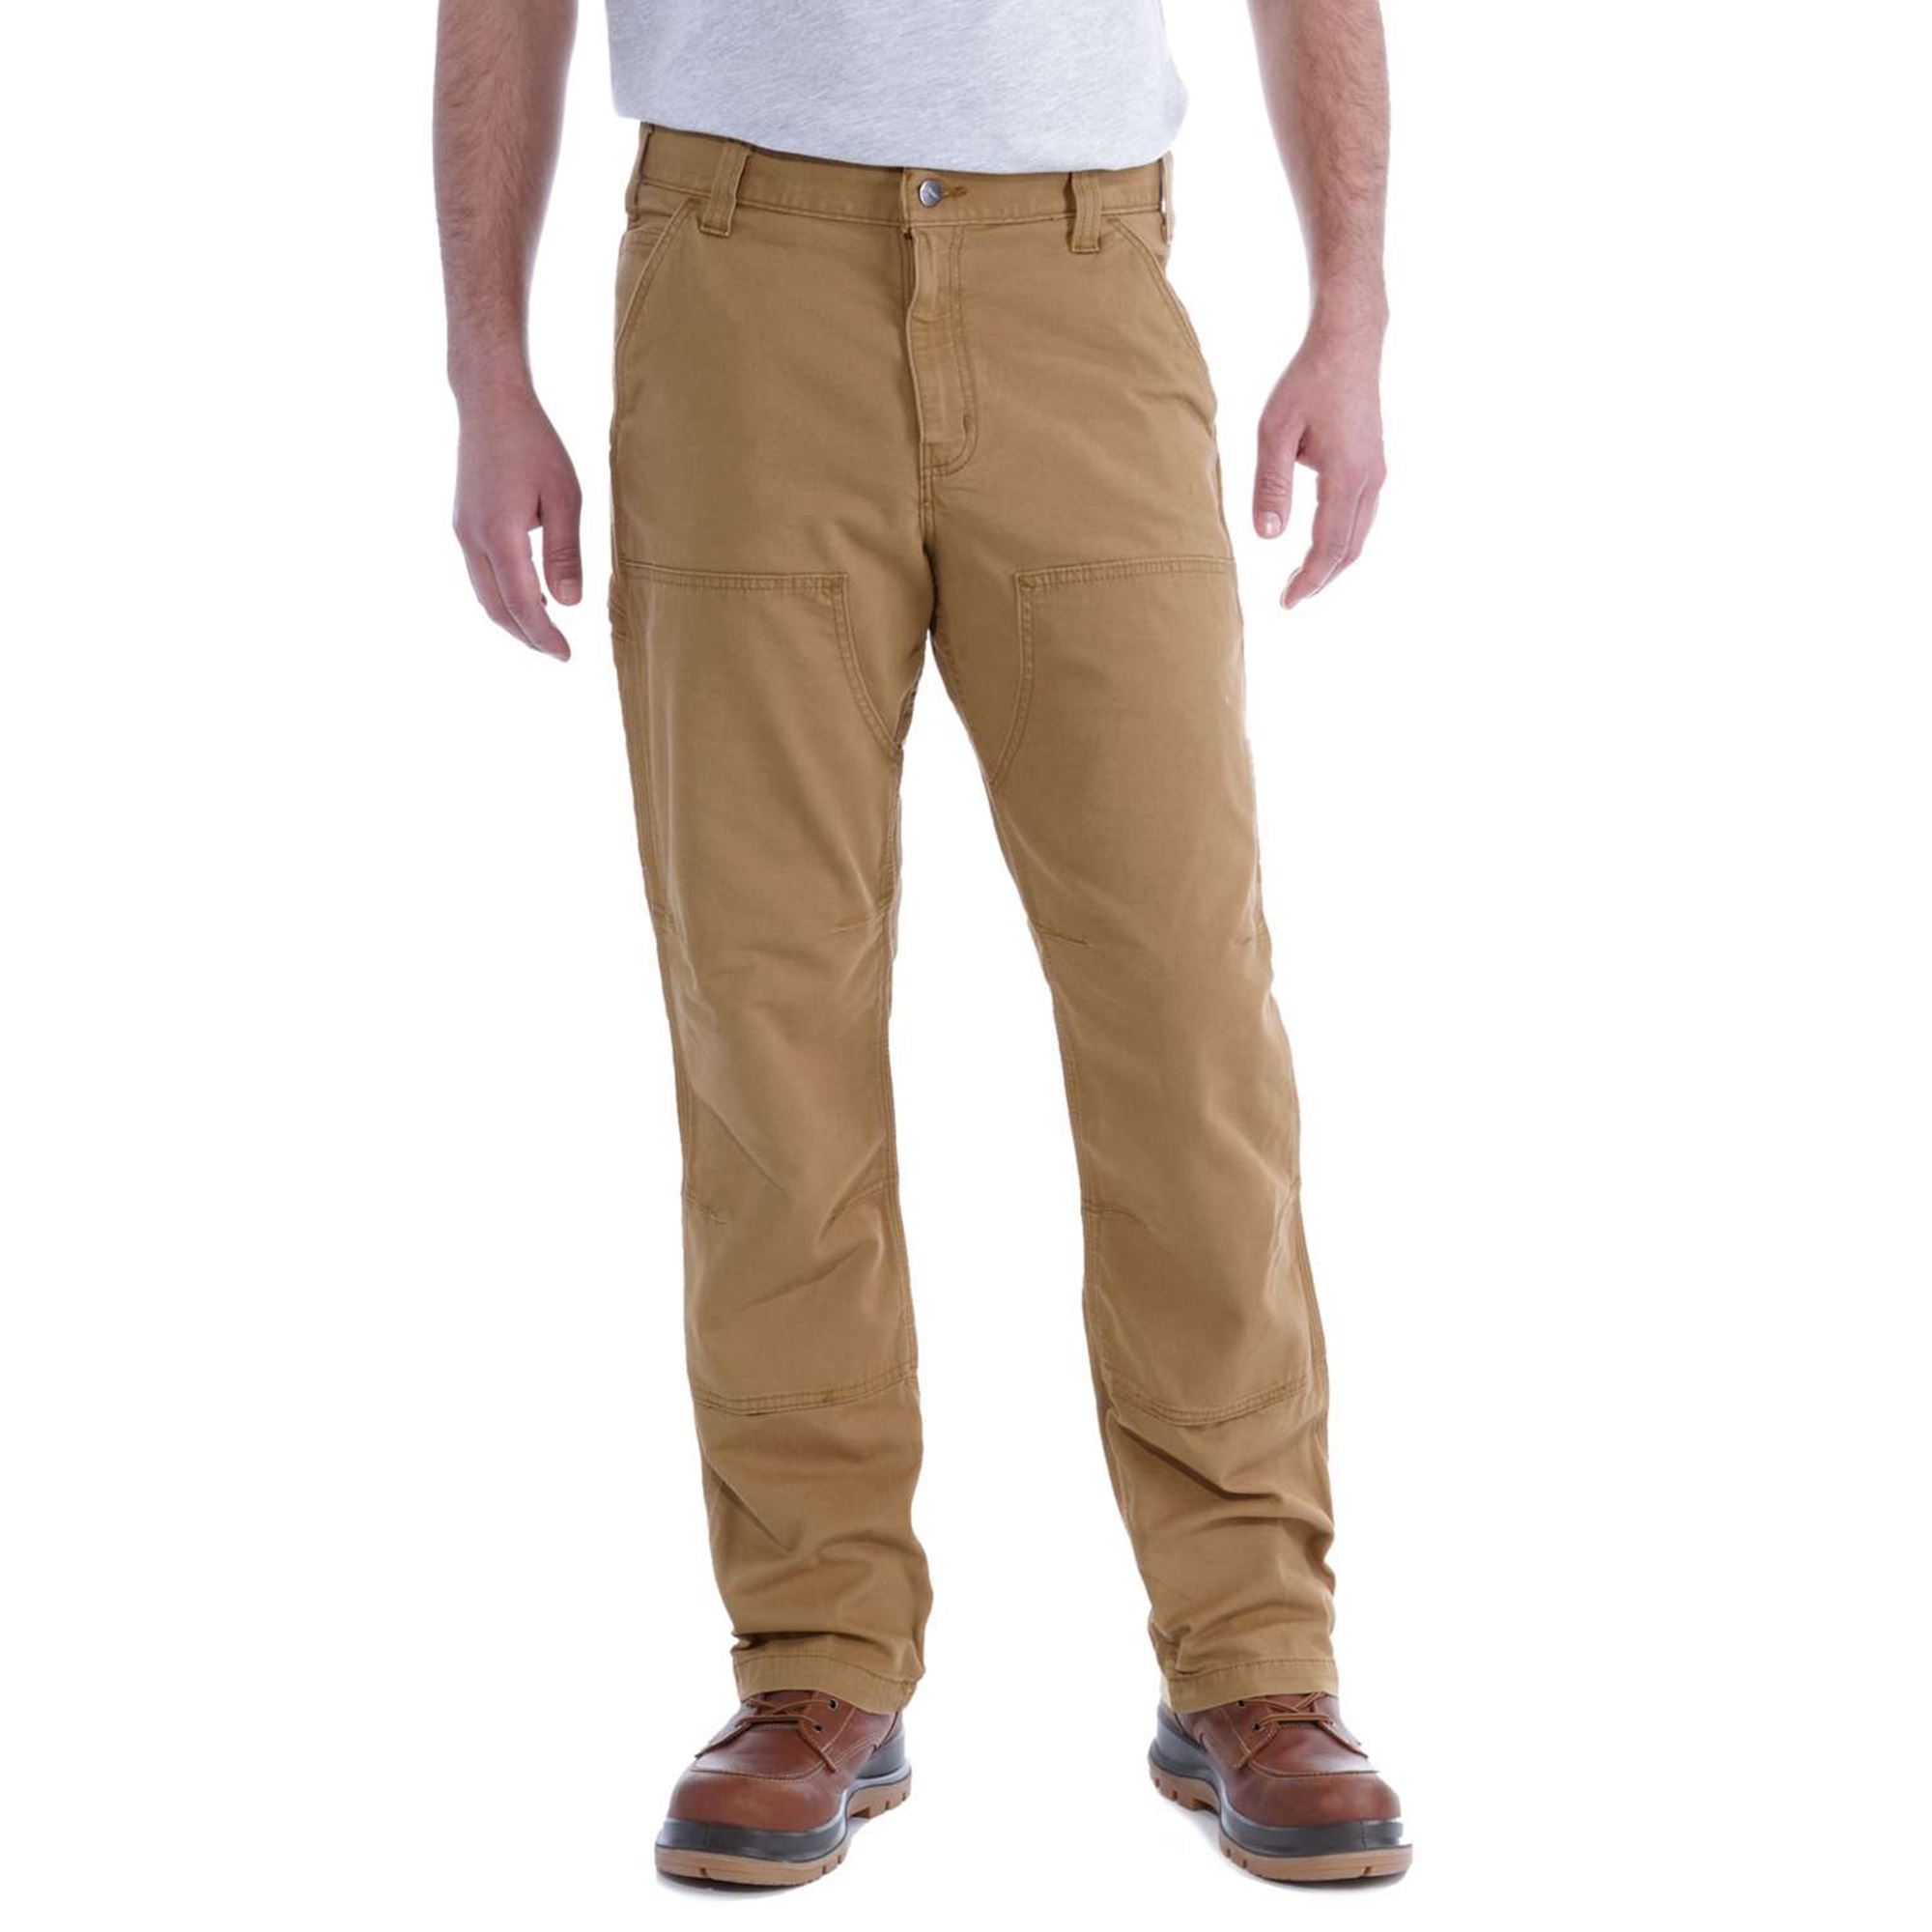 Carhartt Rigby Double Front Stretched Work Trouser